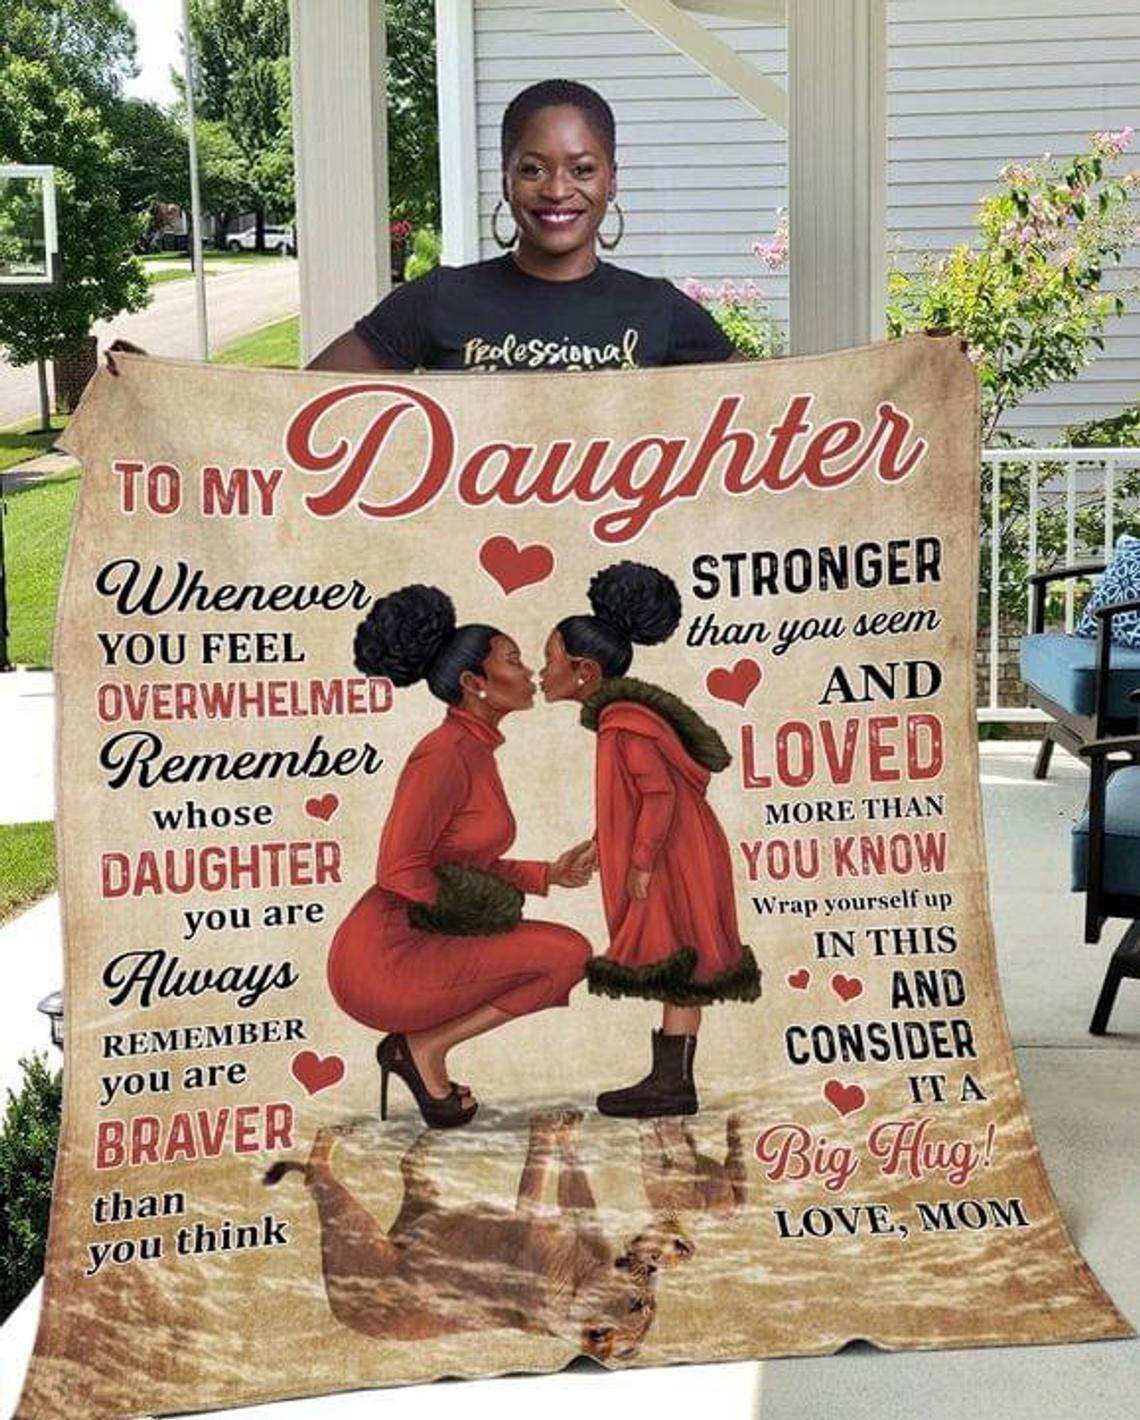 To My Daughter Letter Blanket Gifts, Black Mom, Black Daughter, Fleece Blanket, Daughter And Mom, African Family, Christmas Gift